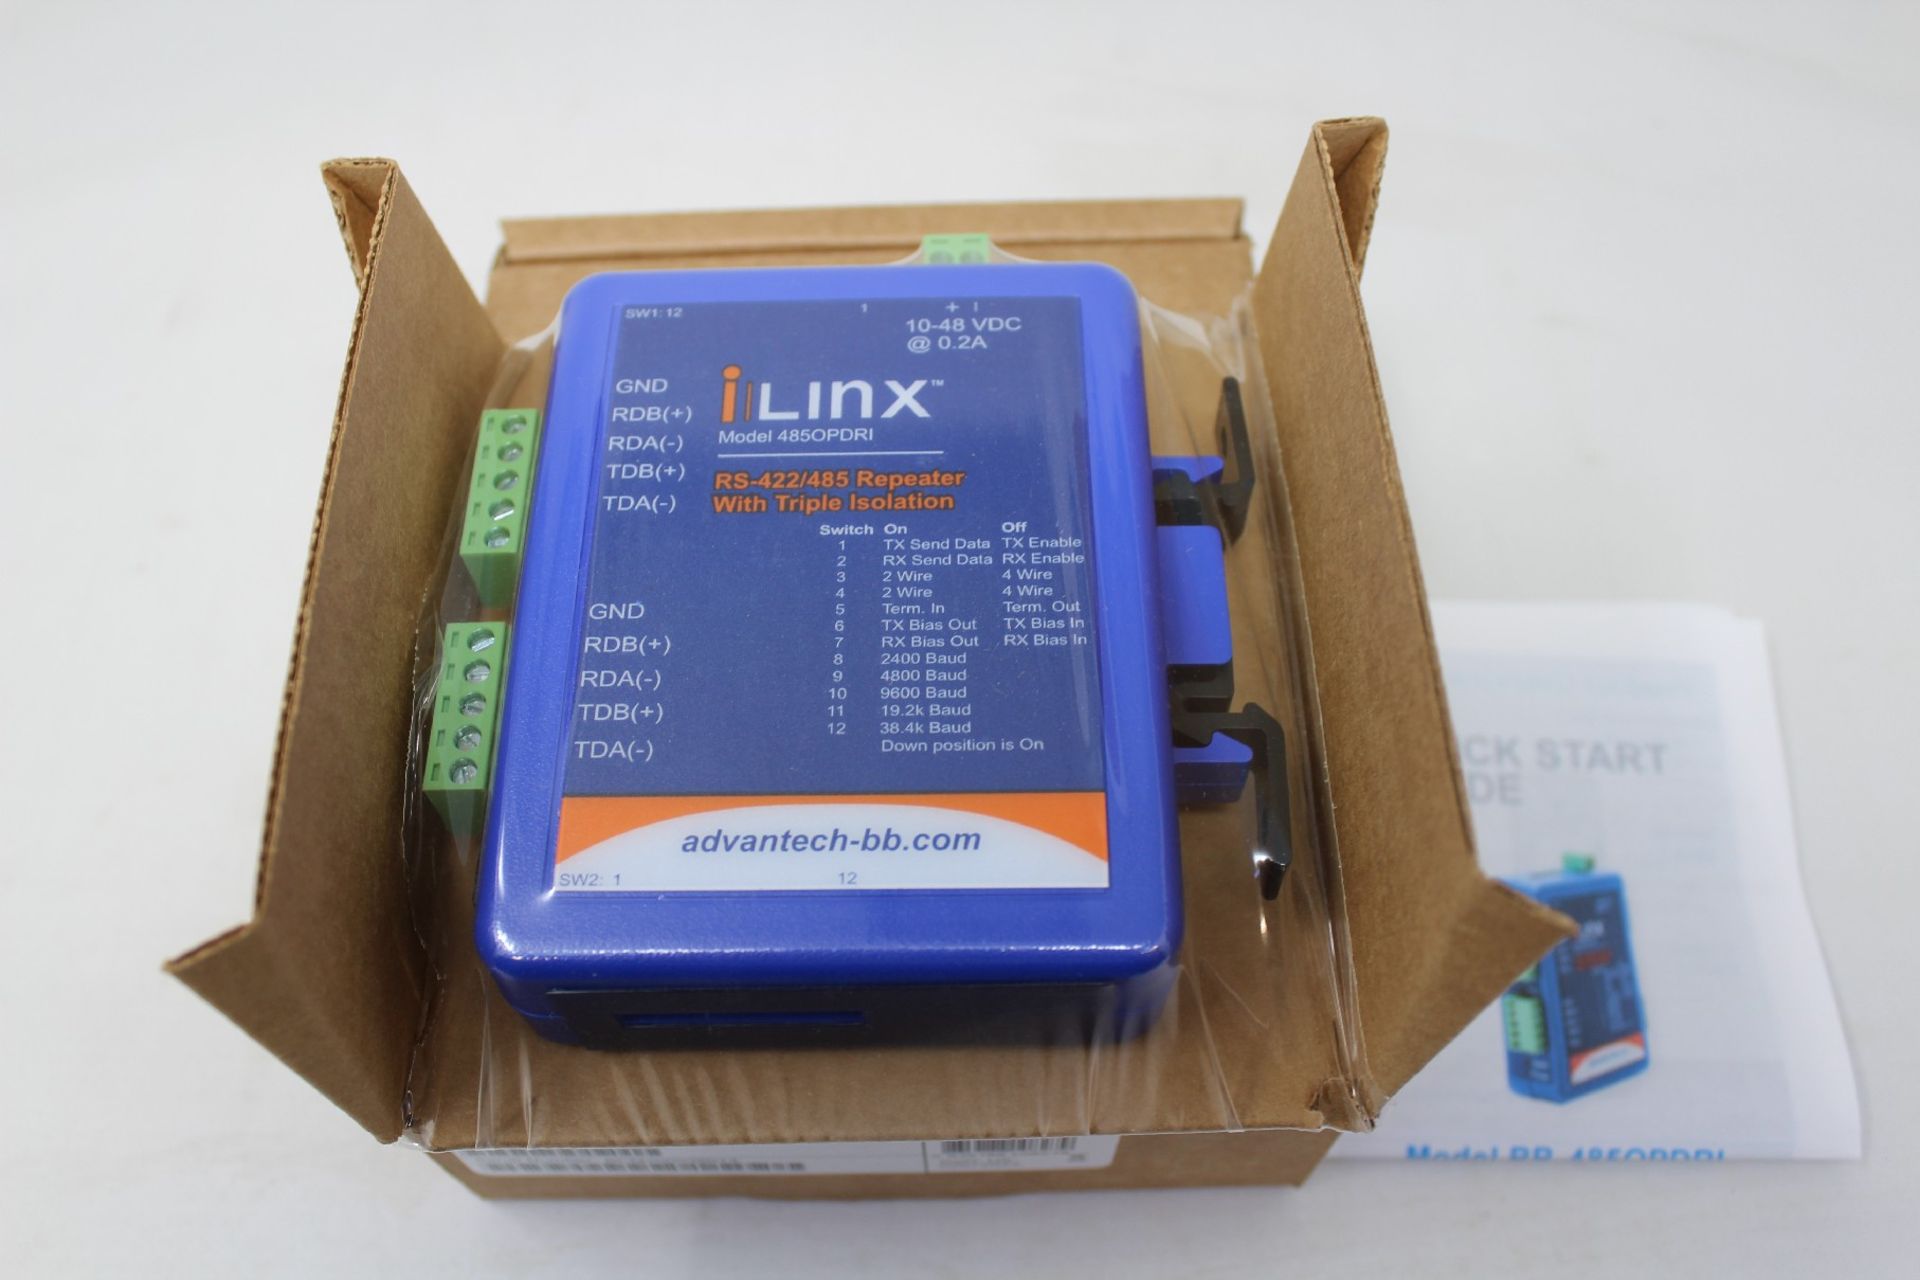 A boxed as new iLINX RS-422/485 Repeater with triple isolation (Model: 4850PDRI).